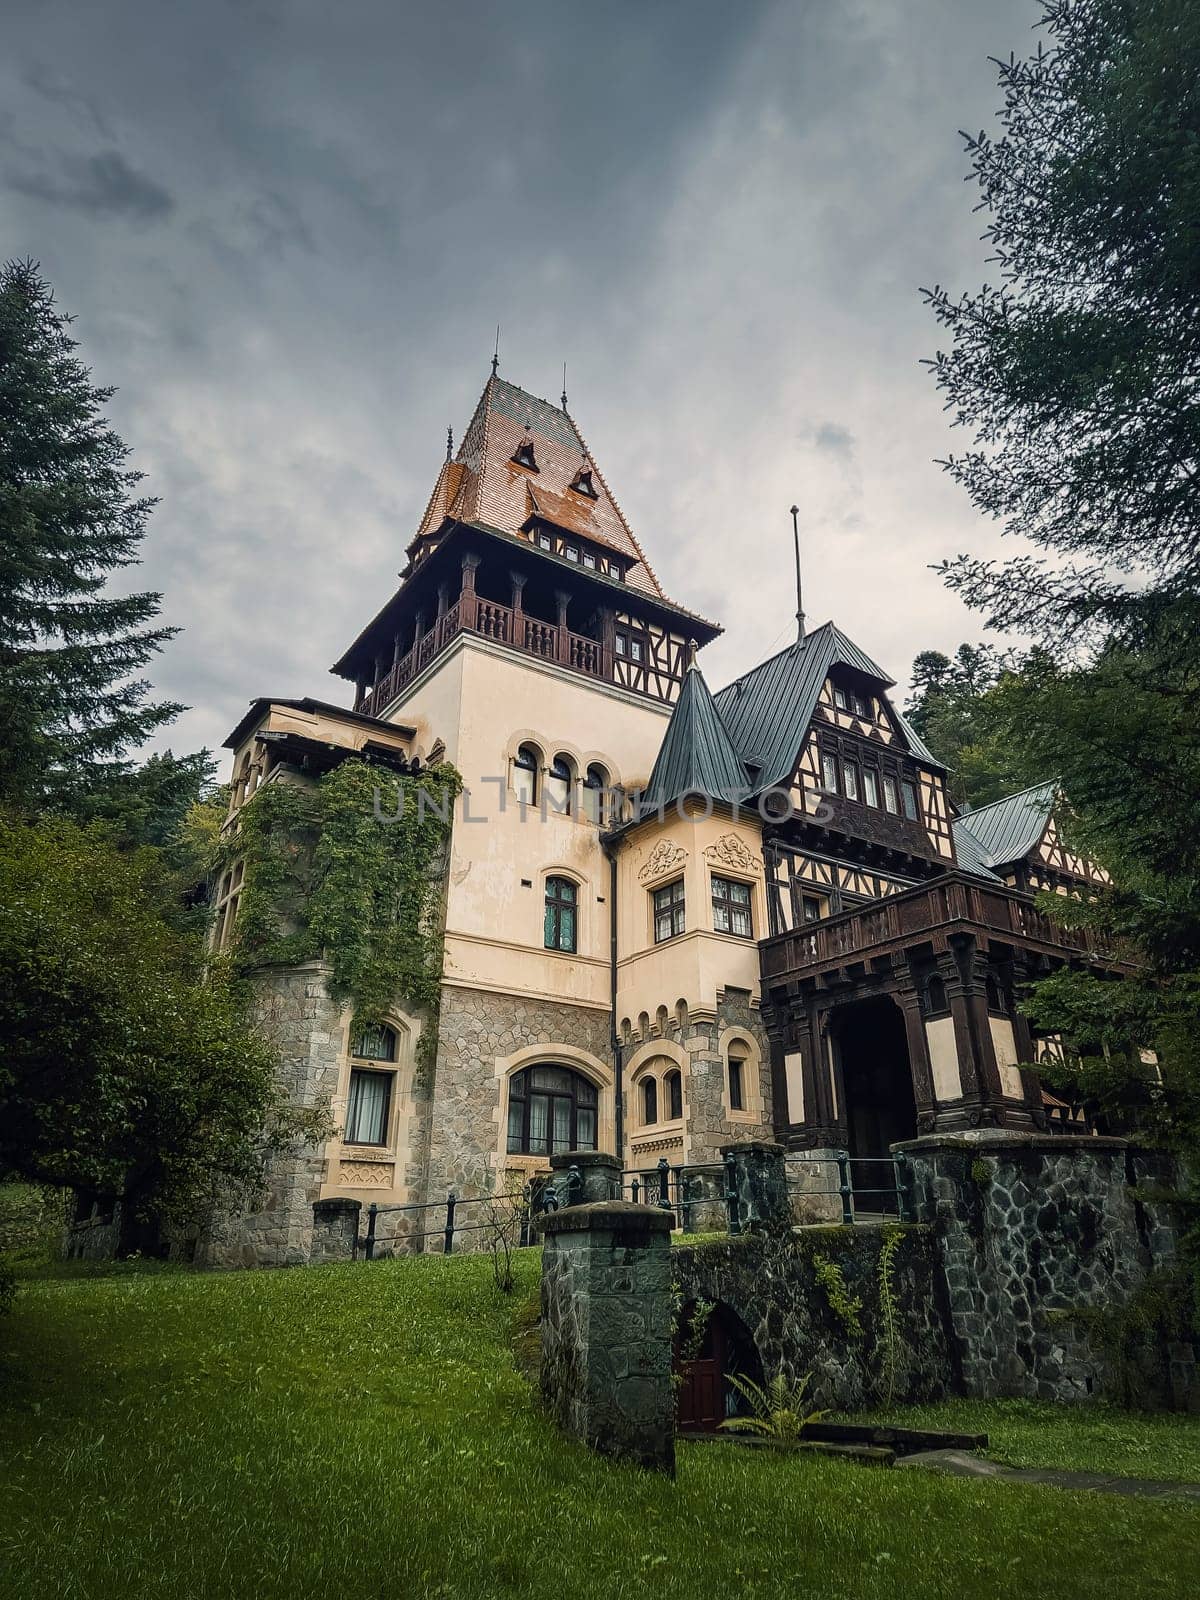 Pelisor castle royal summer residence in Sinaia, Romania. A part of the famous Peles complex in the Carpathian mountains, Prahova County, Transylvania. by psychoshadow